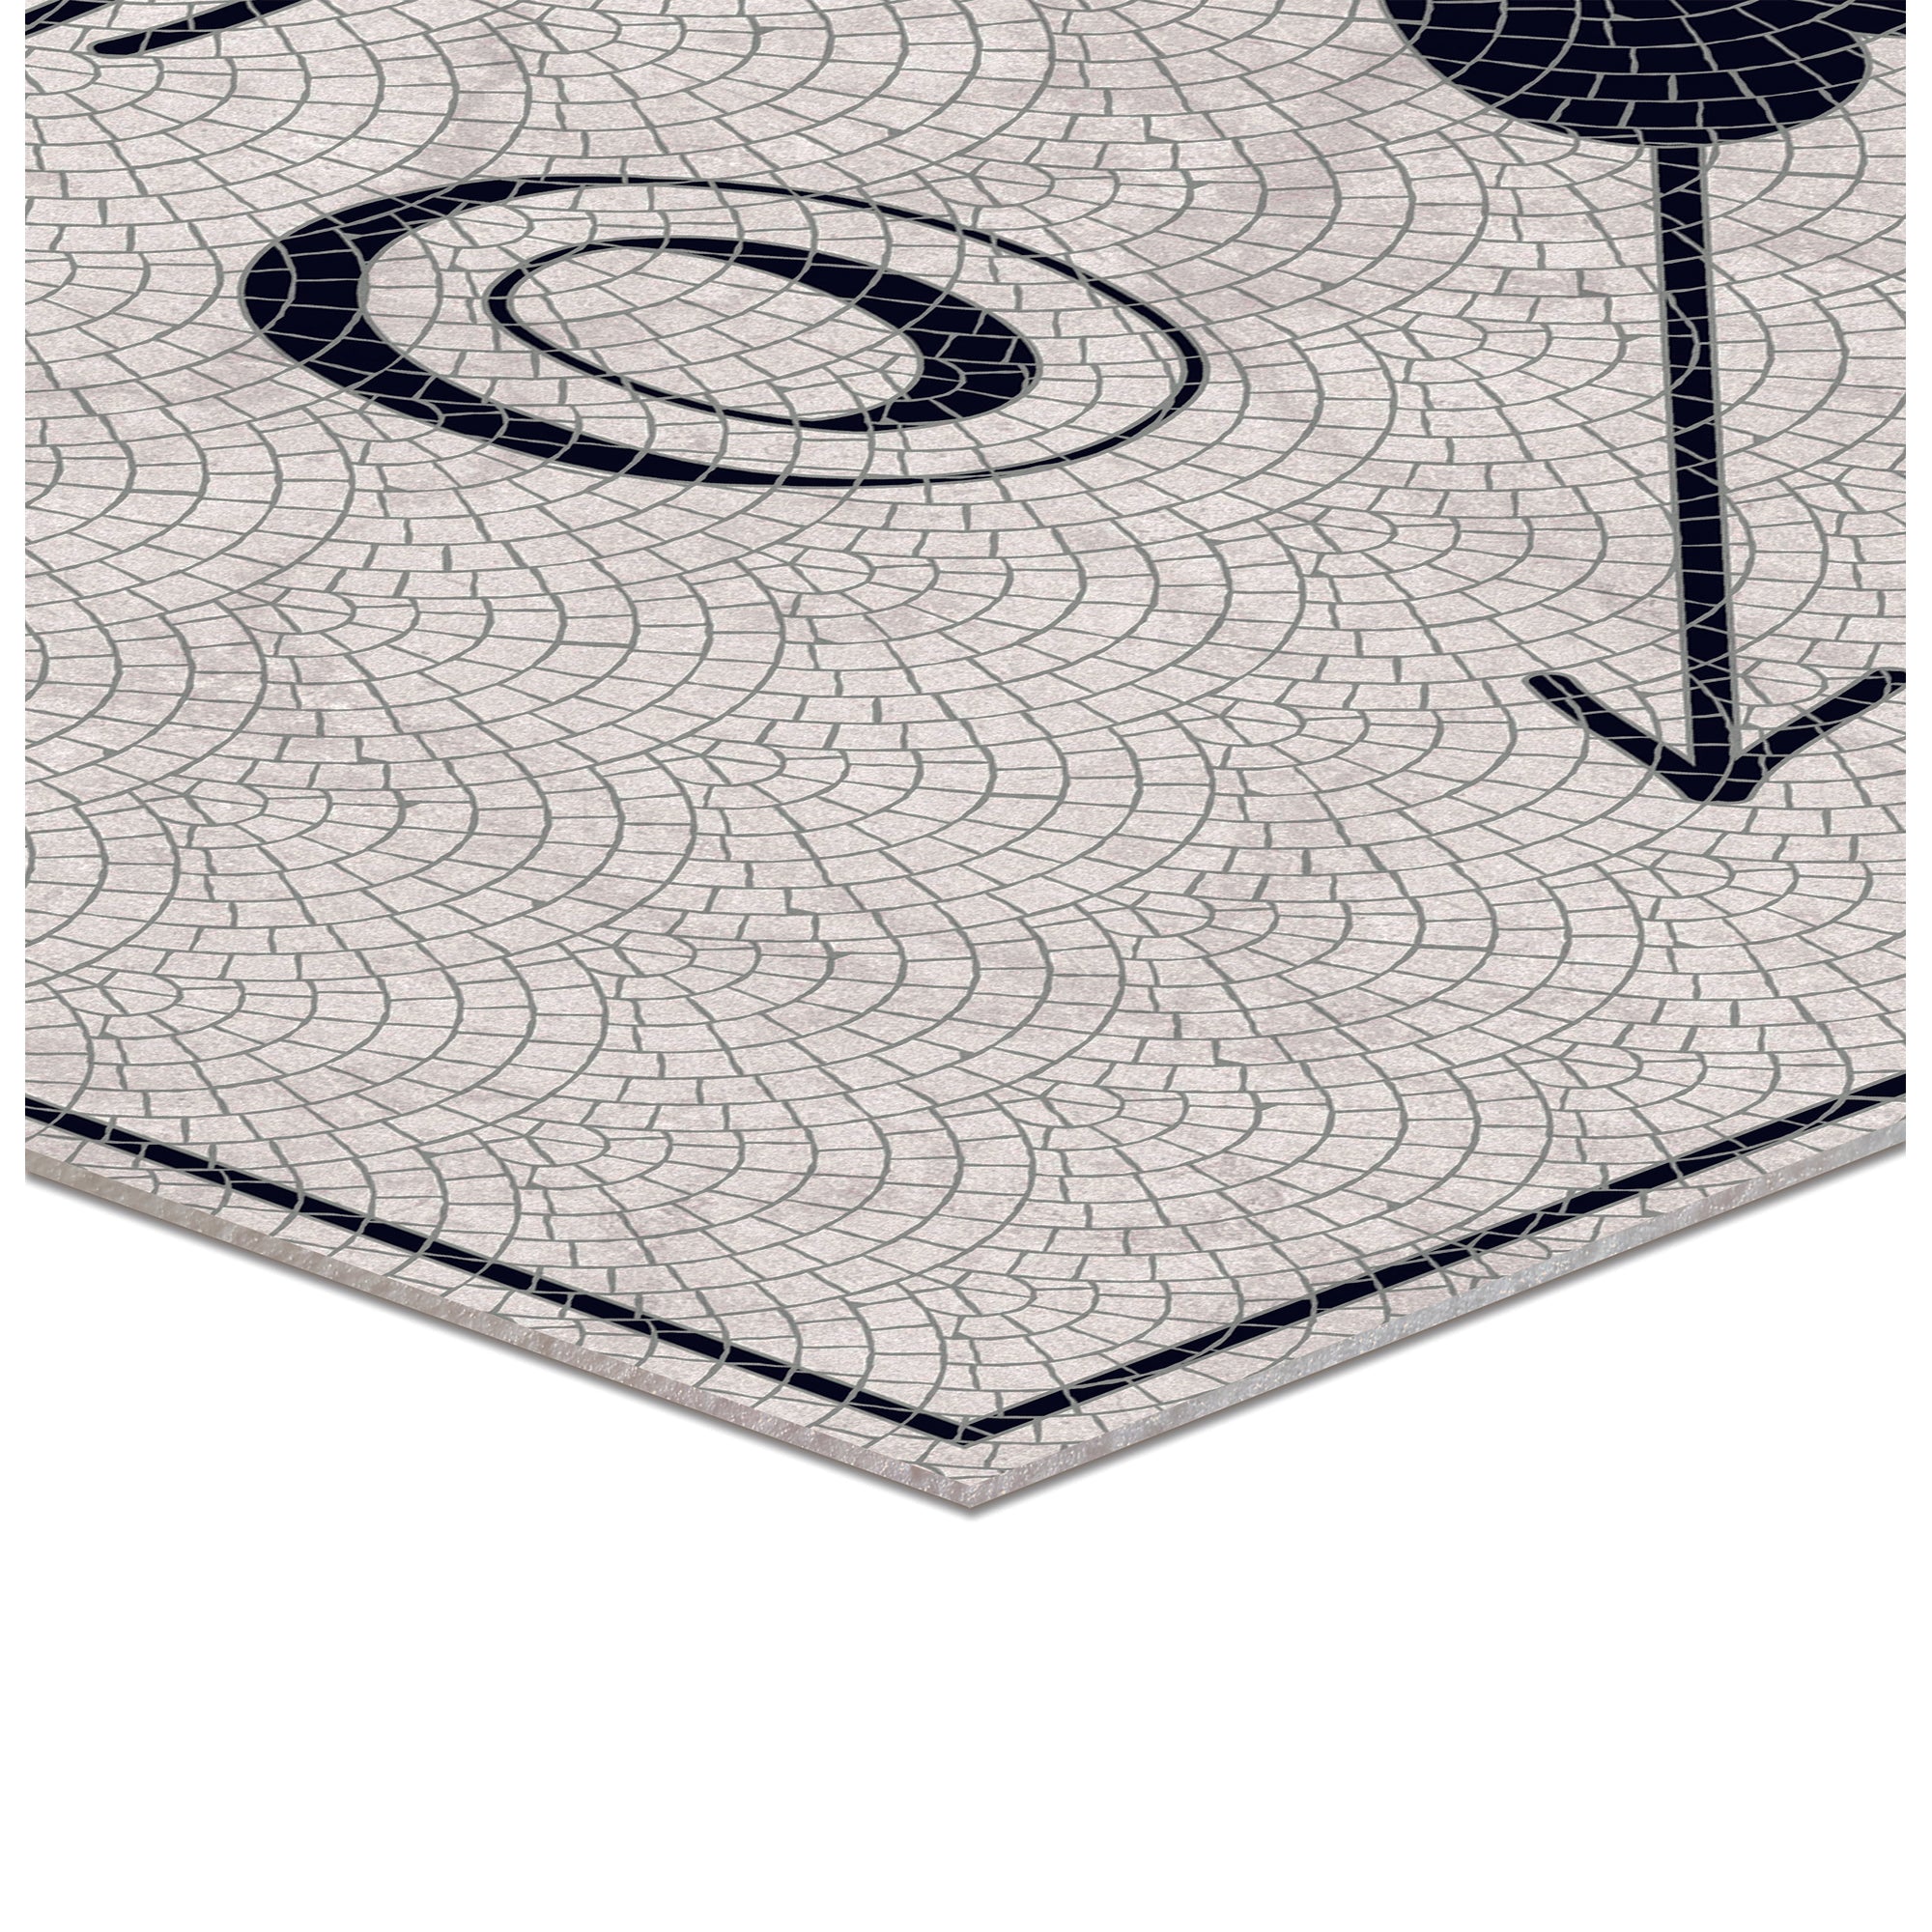 Everly - 023805 - Tapis.